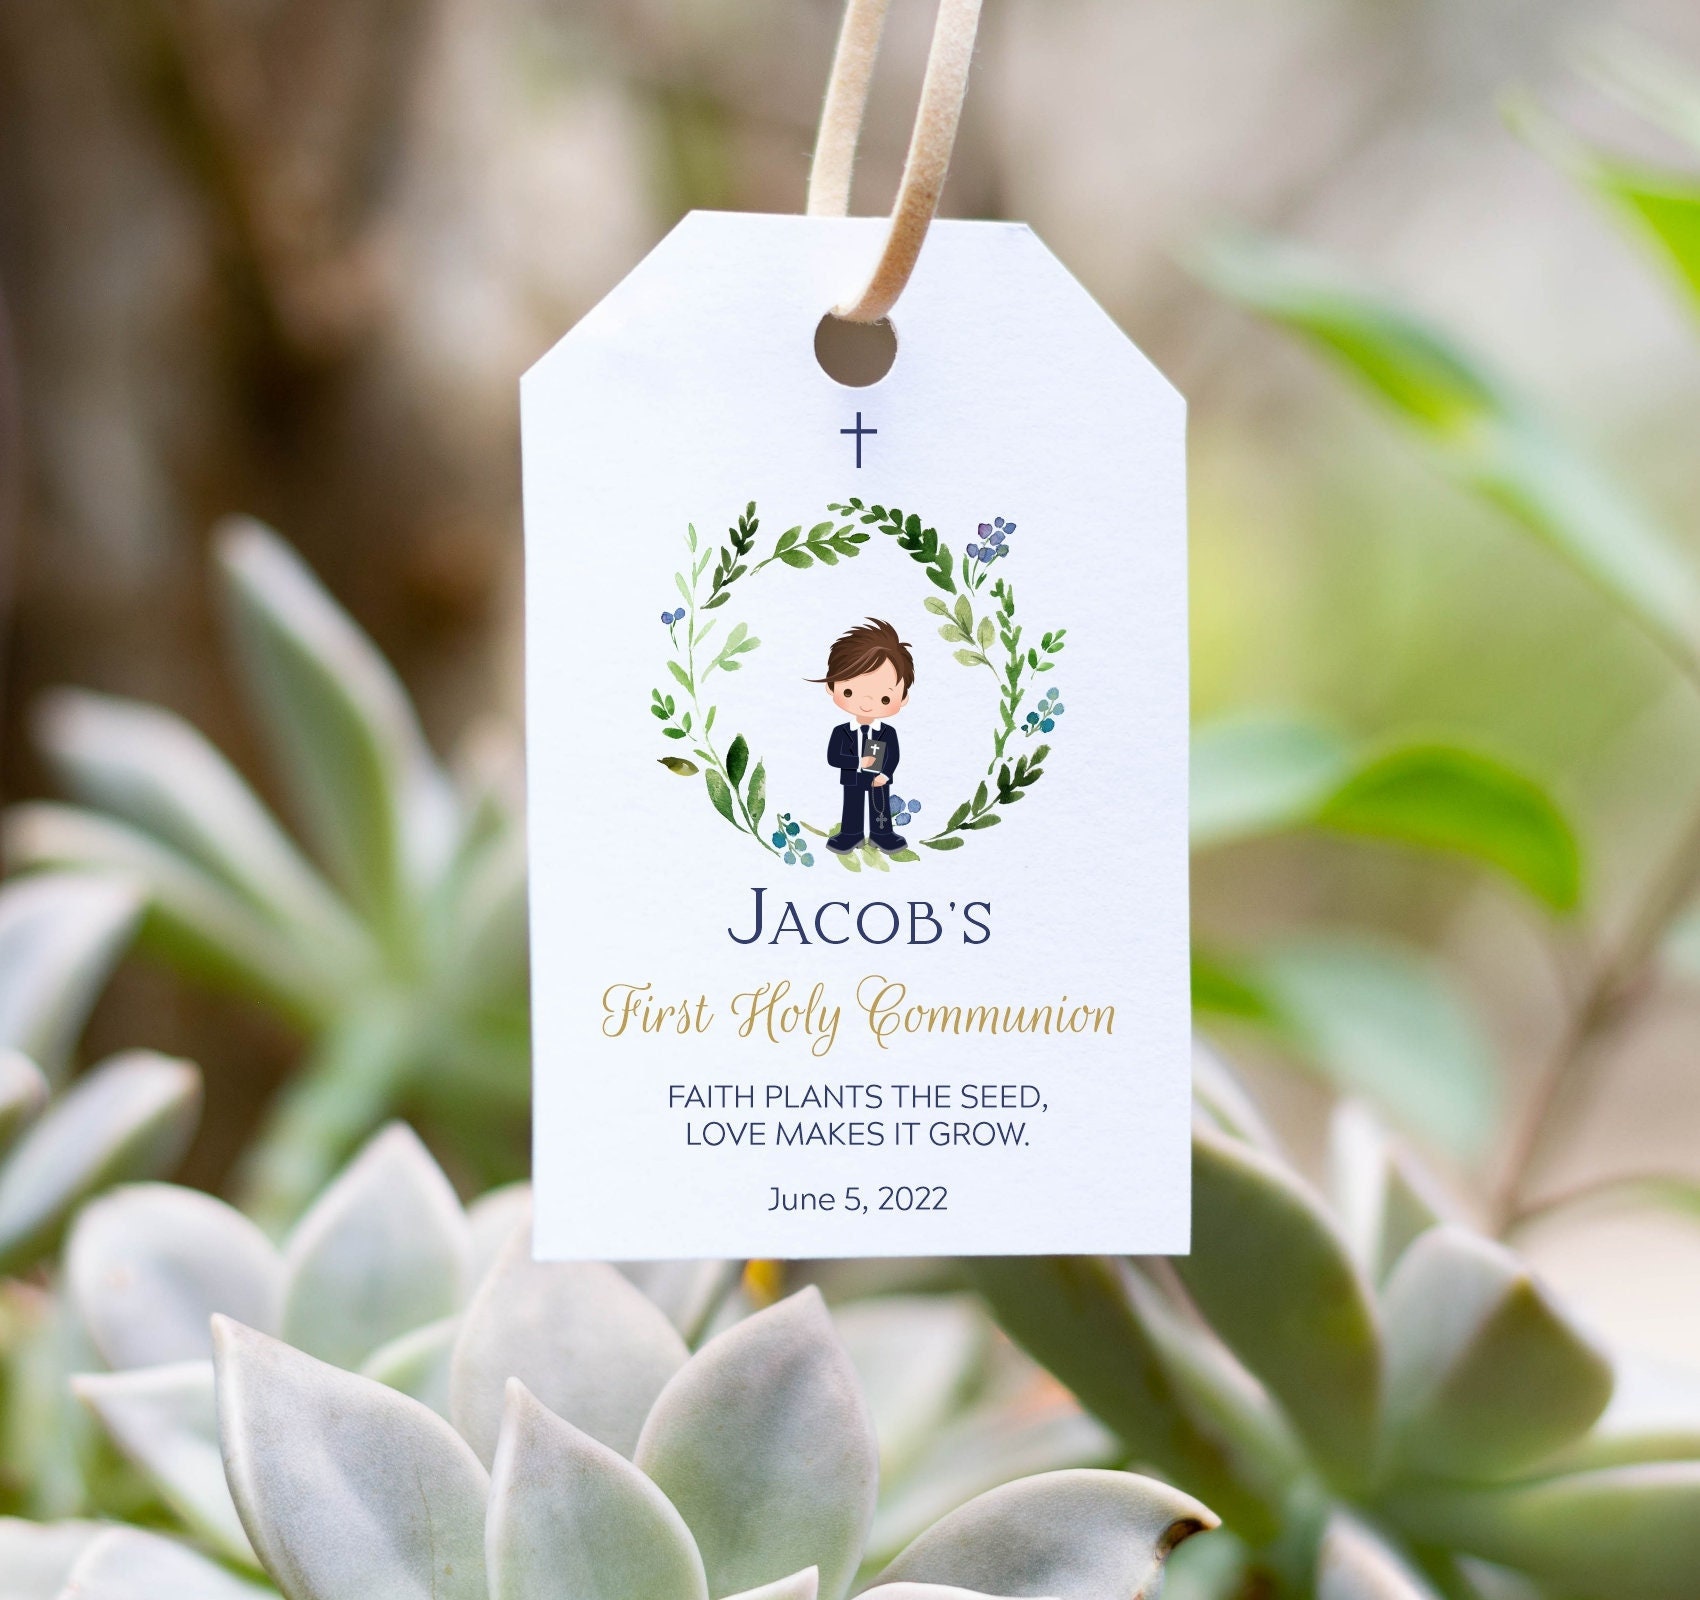 DIY Tags for Handmade Gifts or Favors - Garden Sanity by Pet Scribbles